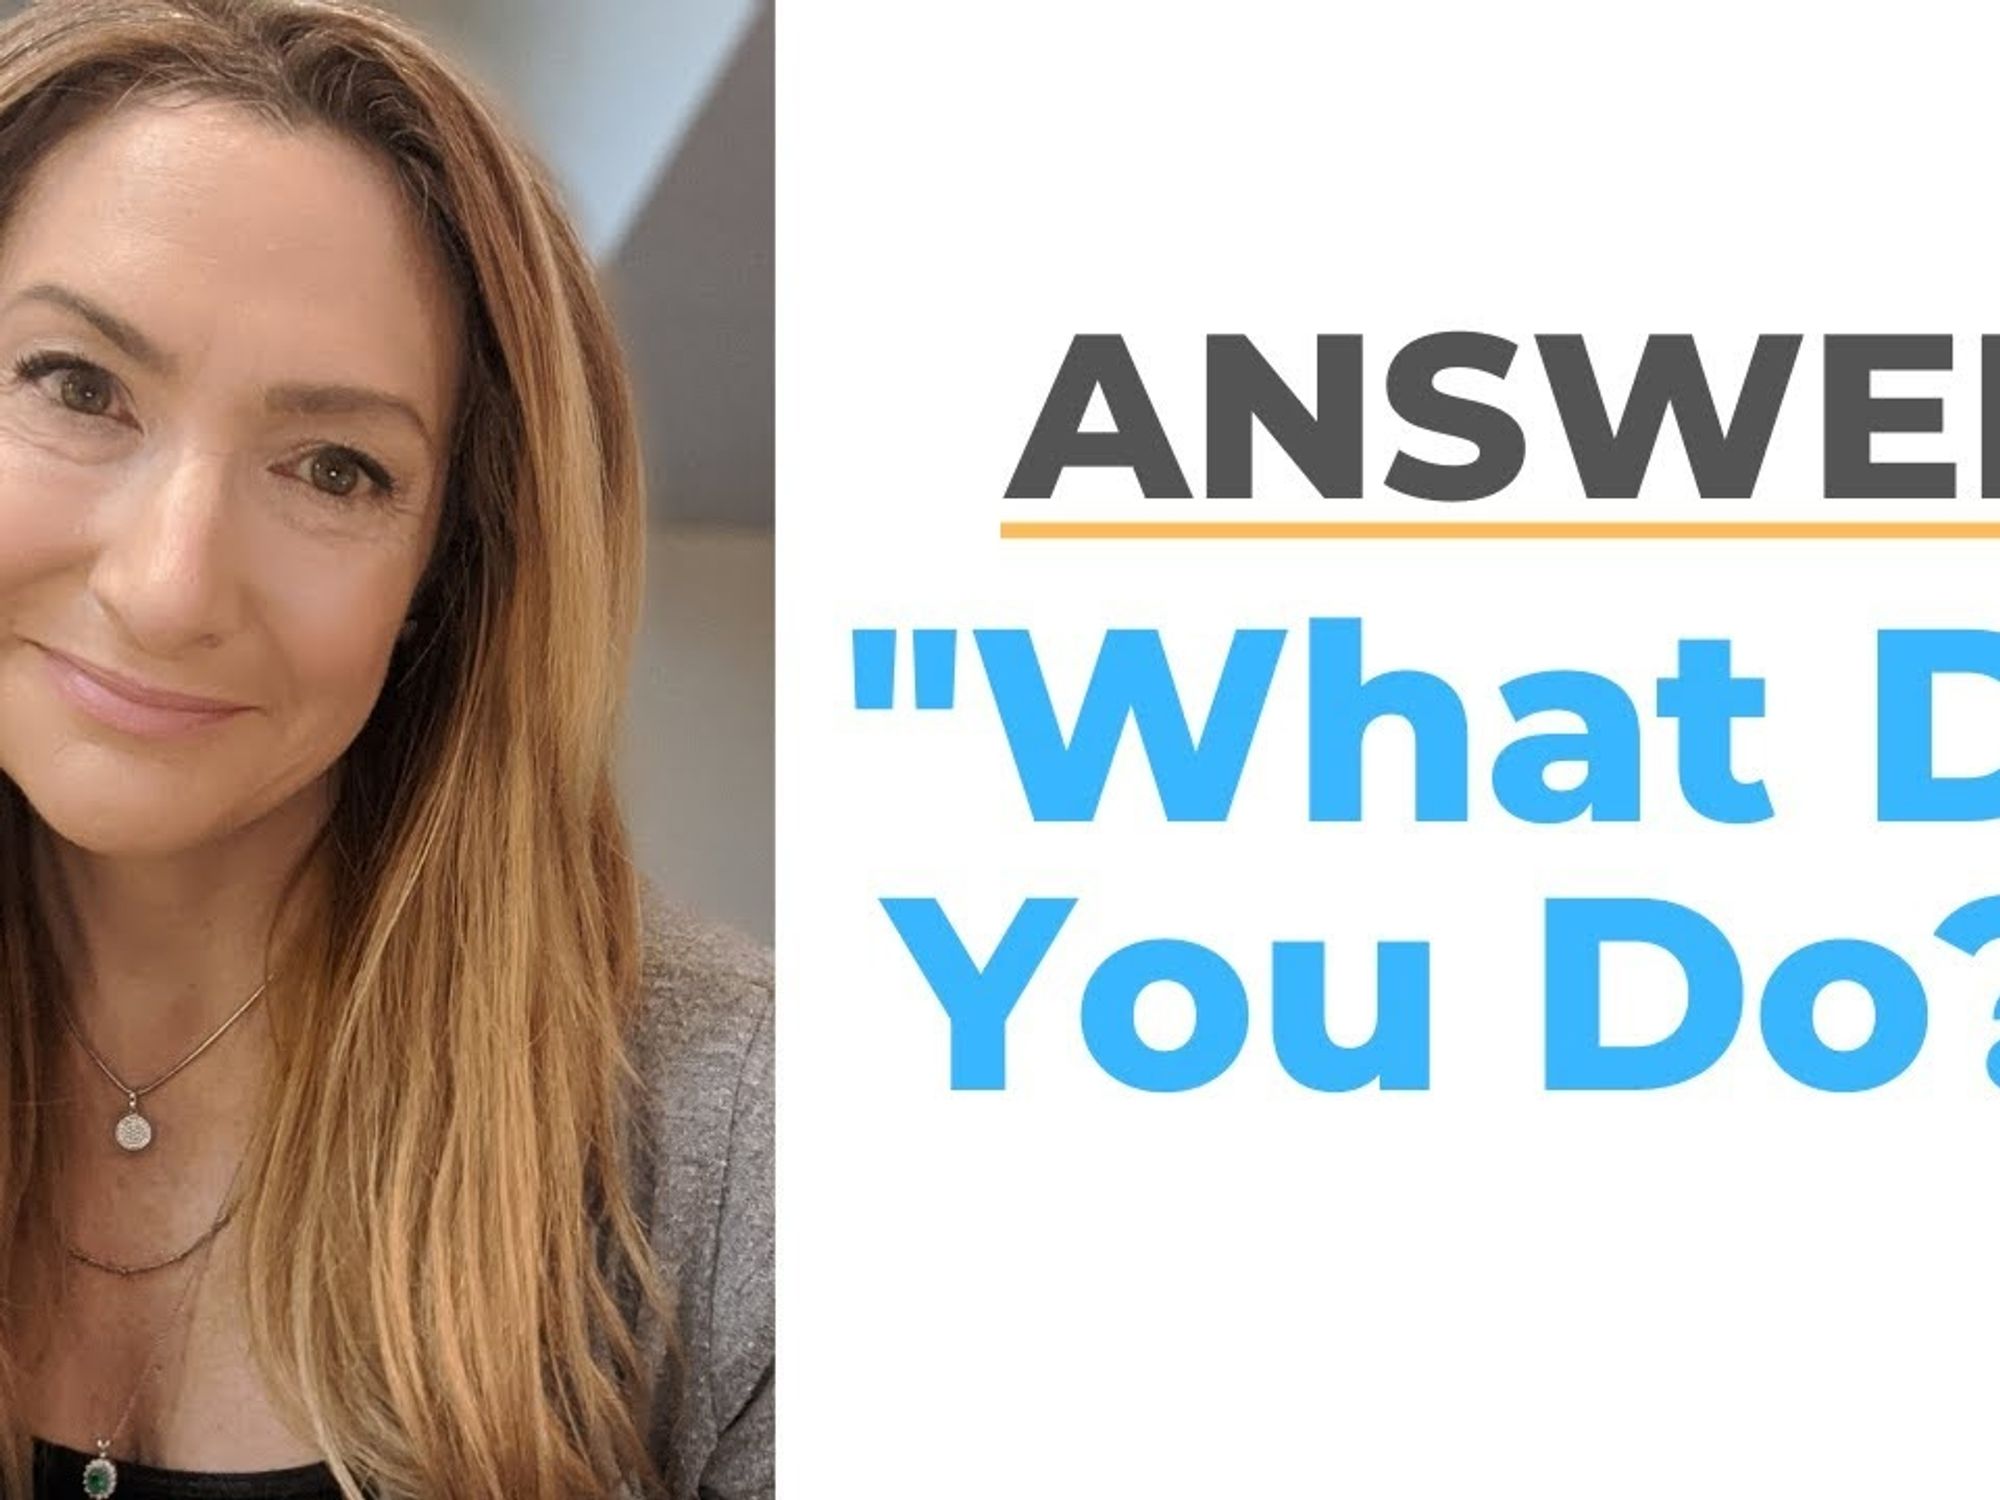 How To Answer "What Do You Do?" The RIGHT Way